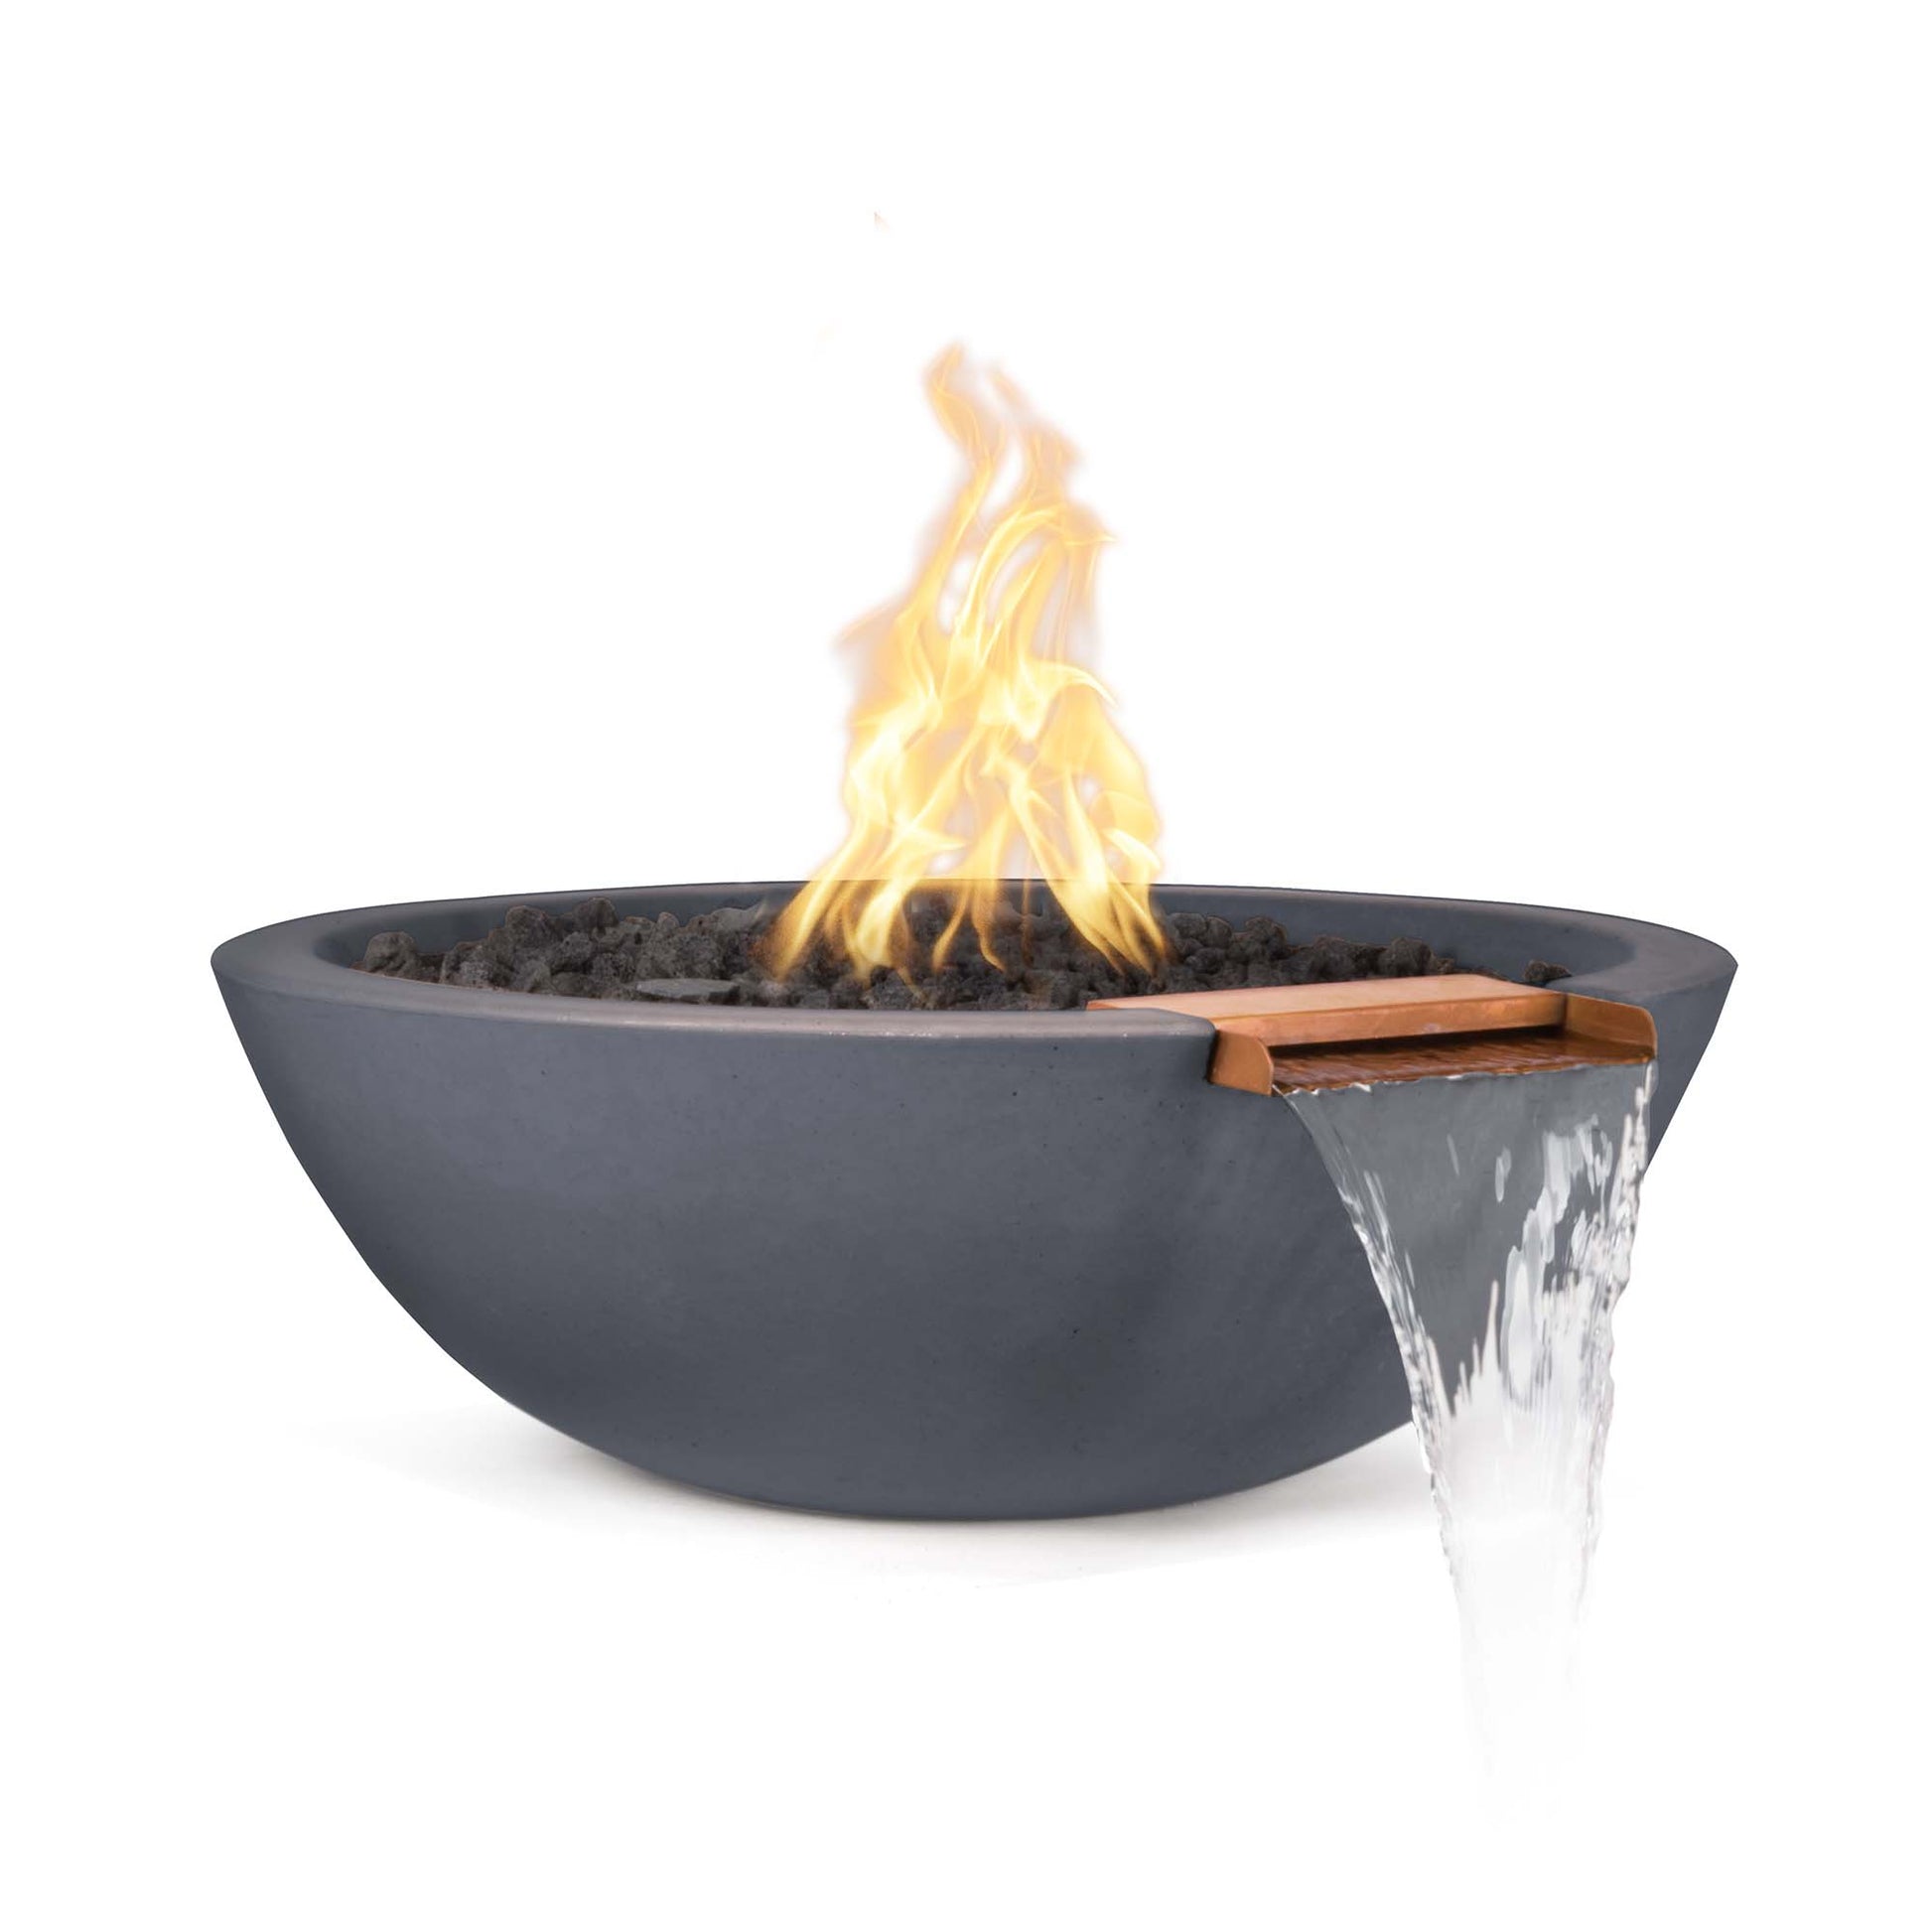 The Outdoor Plus Round Sedona 33" Chocolate GFRC Concrete Natural Gas Fire & Water Bowl with Match Lit with Flame Sense Ignition